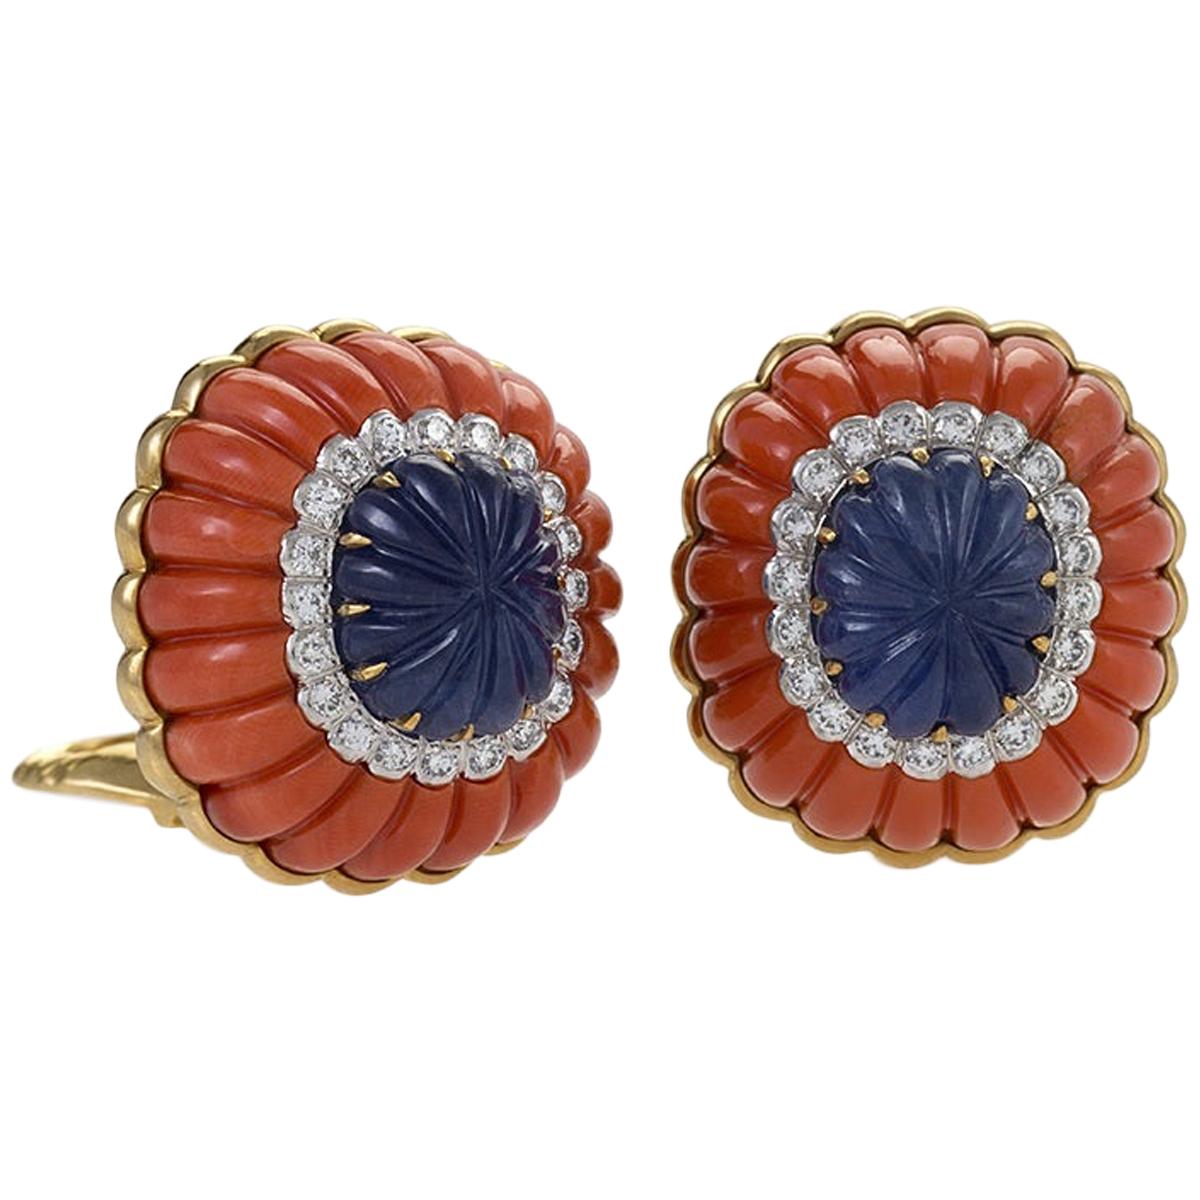 Gold and Platinum Earrings with Diamonds, Sapphires and Corals by David Webb